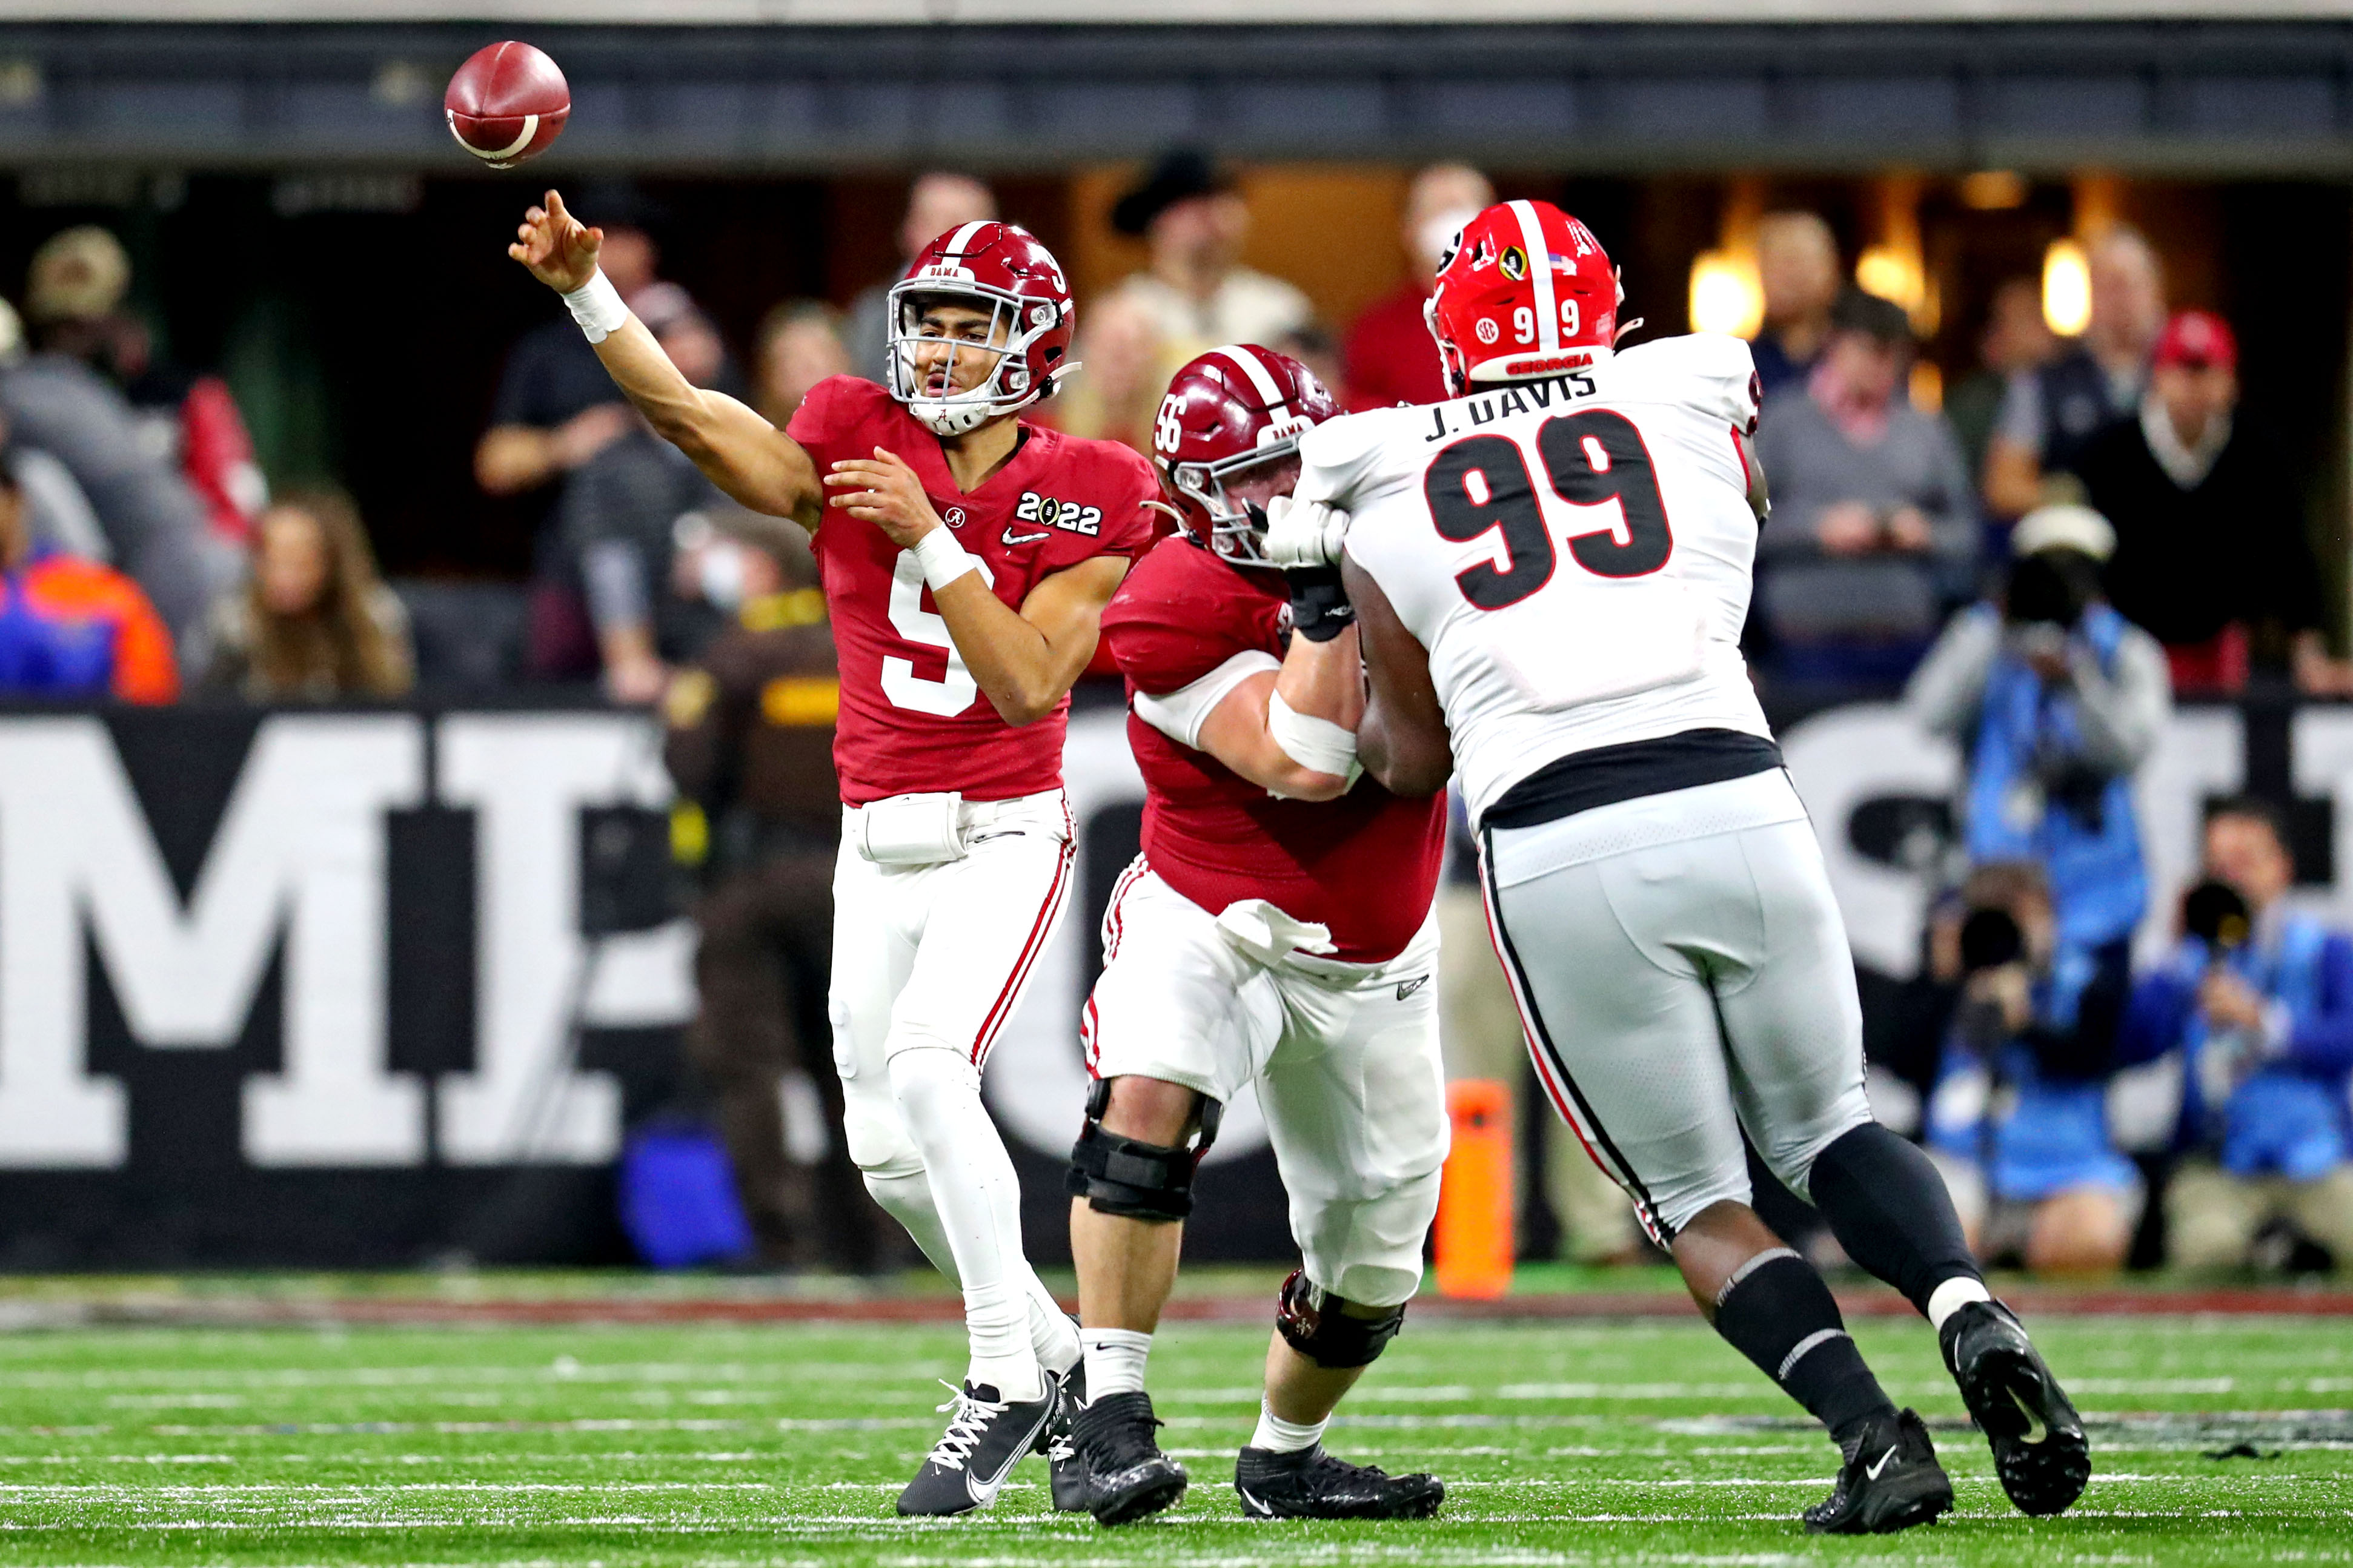 Jan 10, 2022; Indianapolis, IN, USA; Alabama Crimson Tide quarterback Bryce Young (9) throws a pass during the fourth quarter against Georgia Bulldogs defensive lineman Jordan Davis (99) in the 2022 CFP college football national championship game at Lucas Oil Stadium. Mandatory Credit: Mark J. Rebilas-USA TODAY Sports